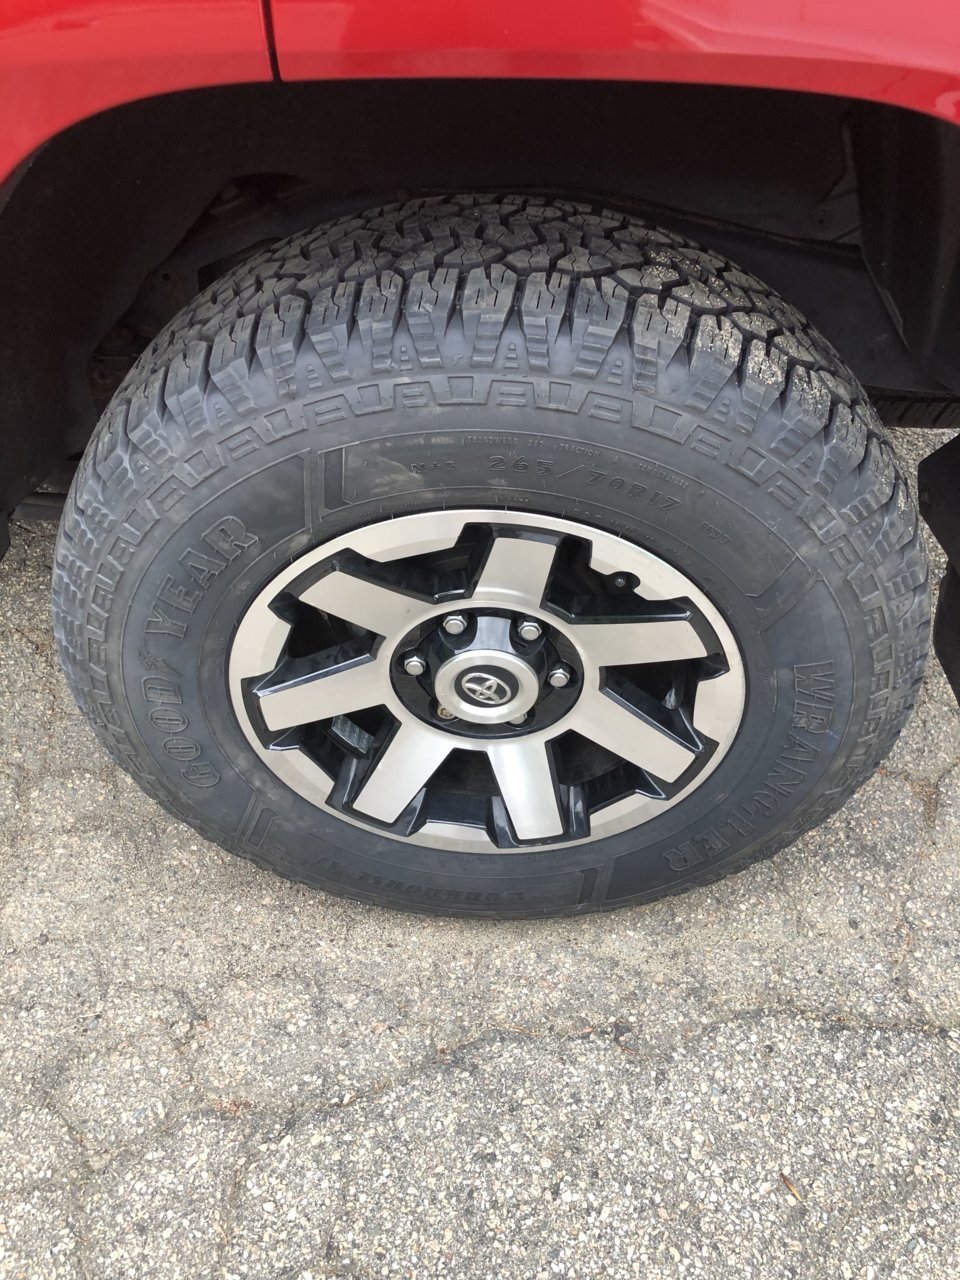 Goodyear wrangler workhorse. Has Anyone tried these? | Page 2 | Tacoma World